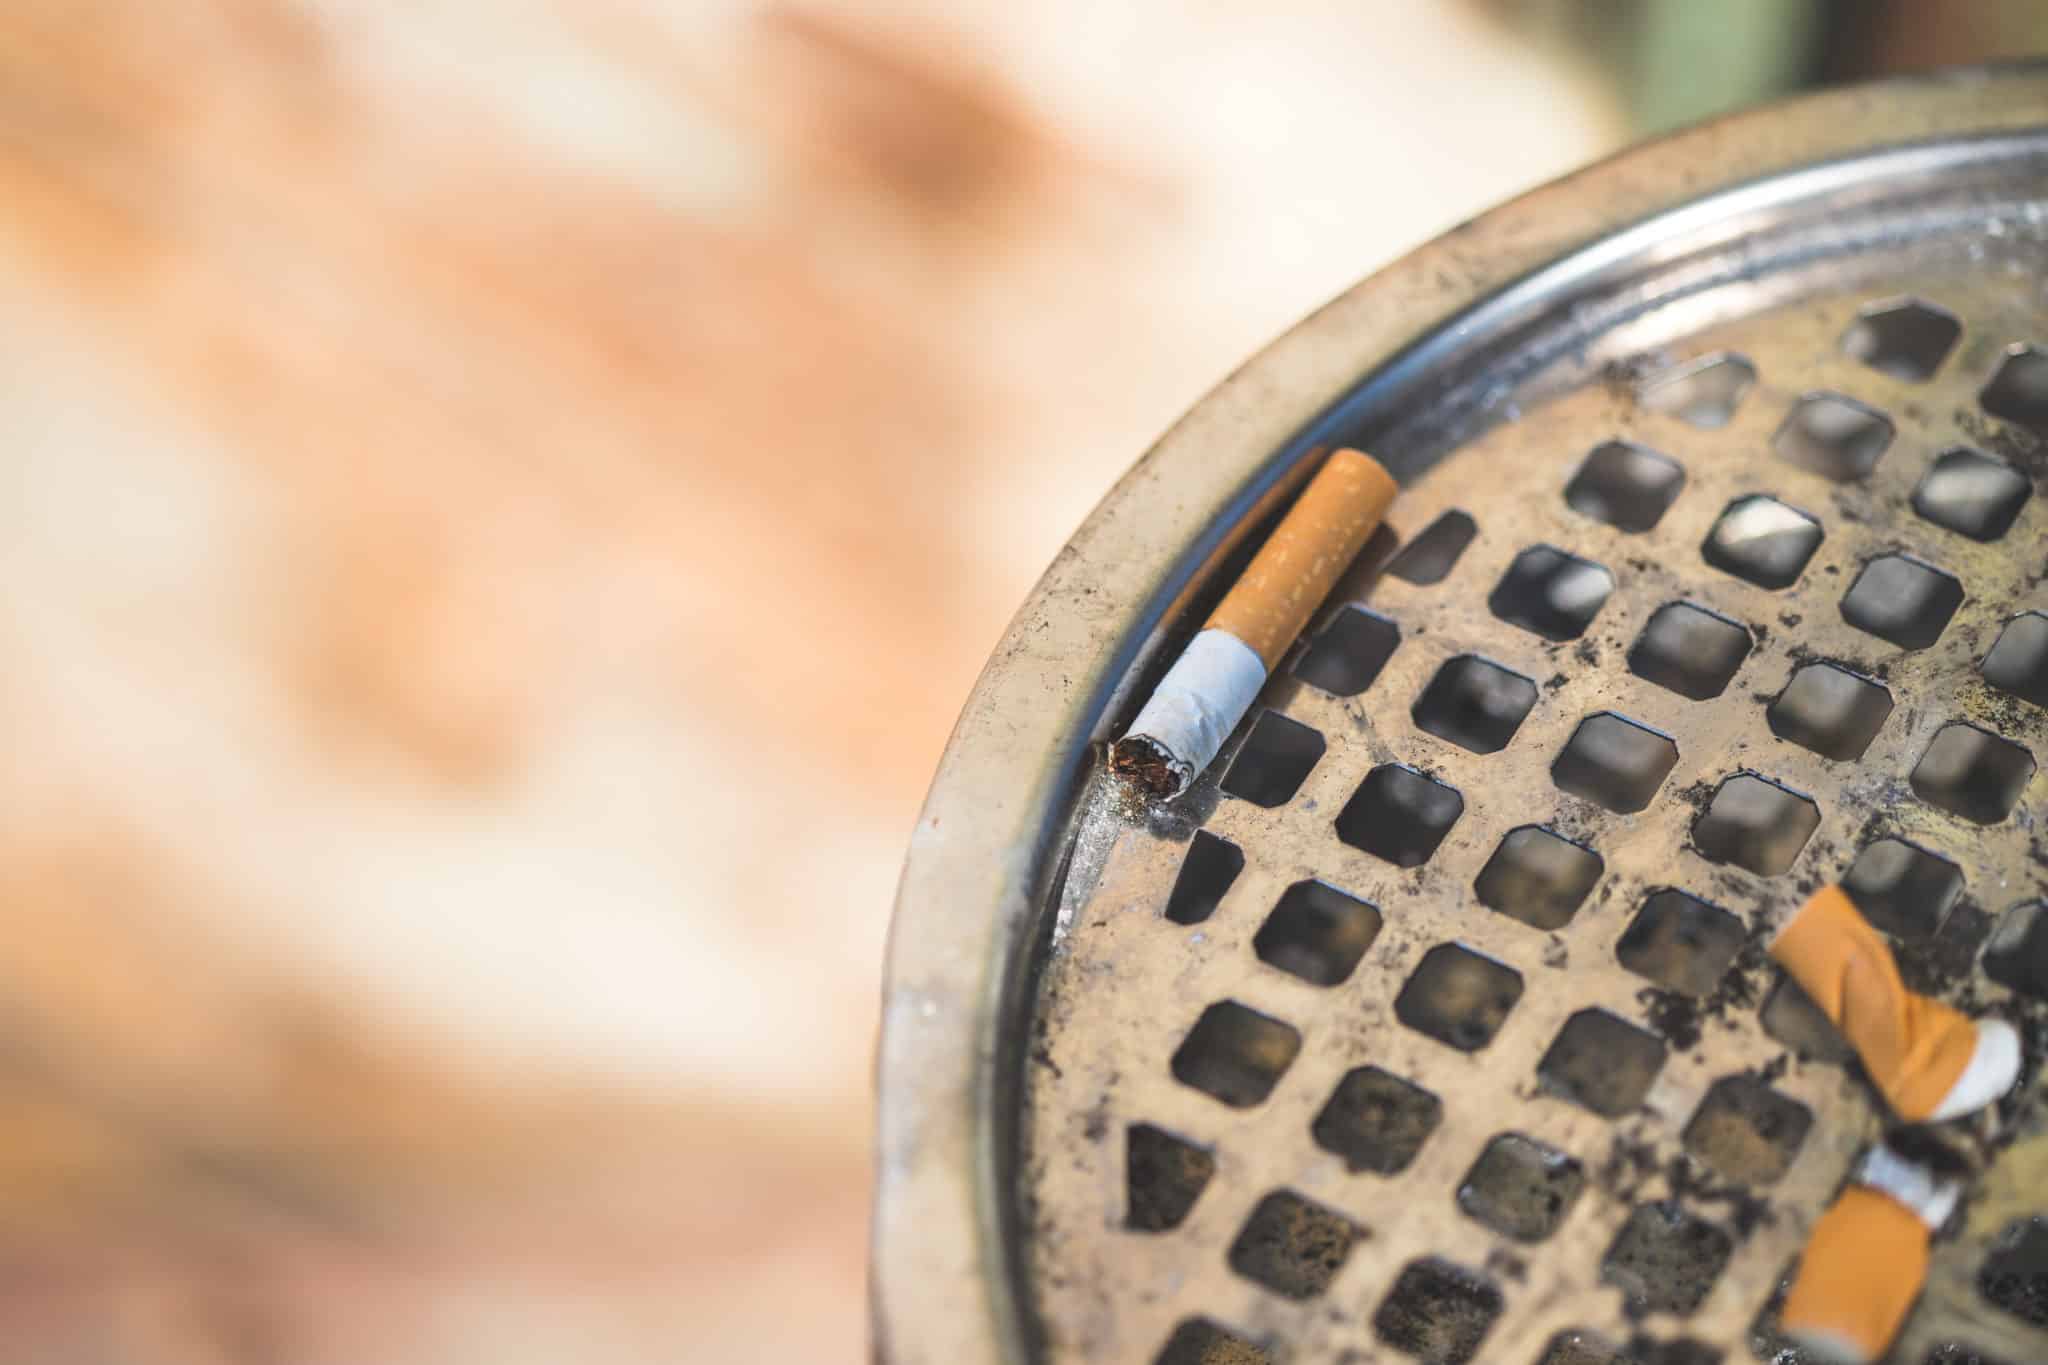 Cigarette lying in public metal ashtray, close up picture